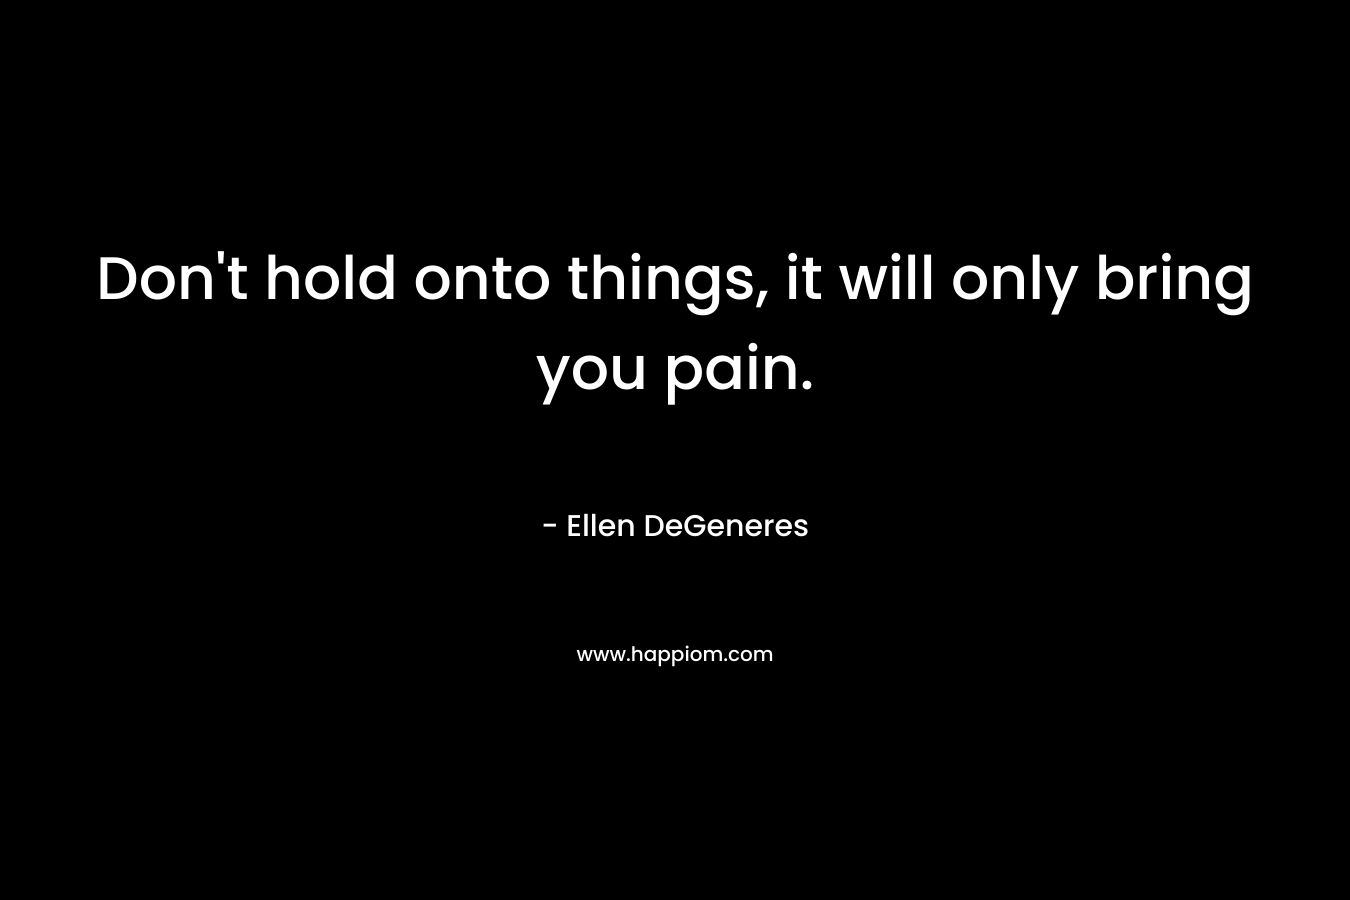 Don’t hold onto things, it will only bring you pain. – Ellen DeGeneres